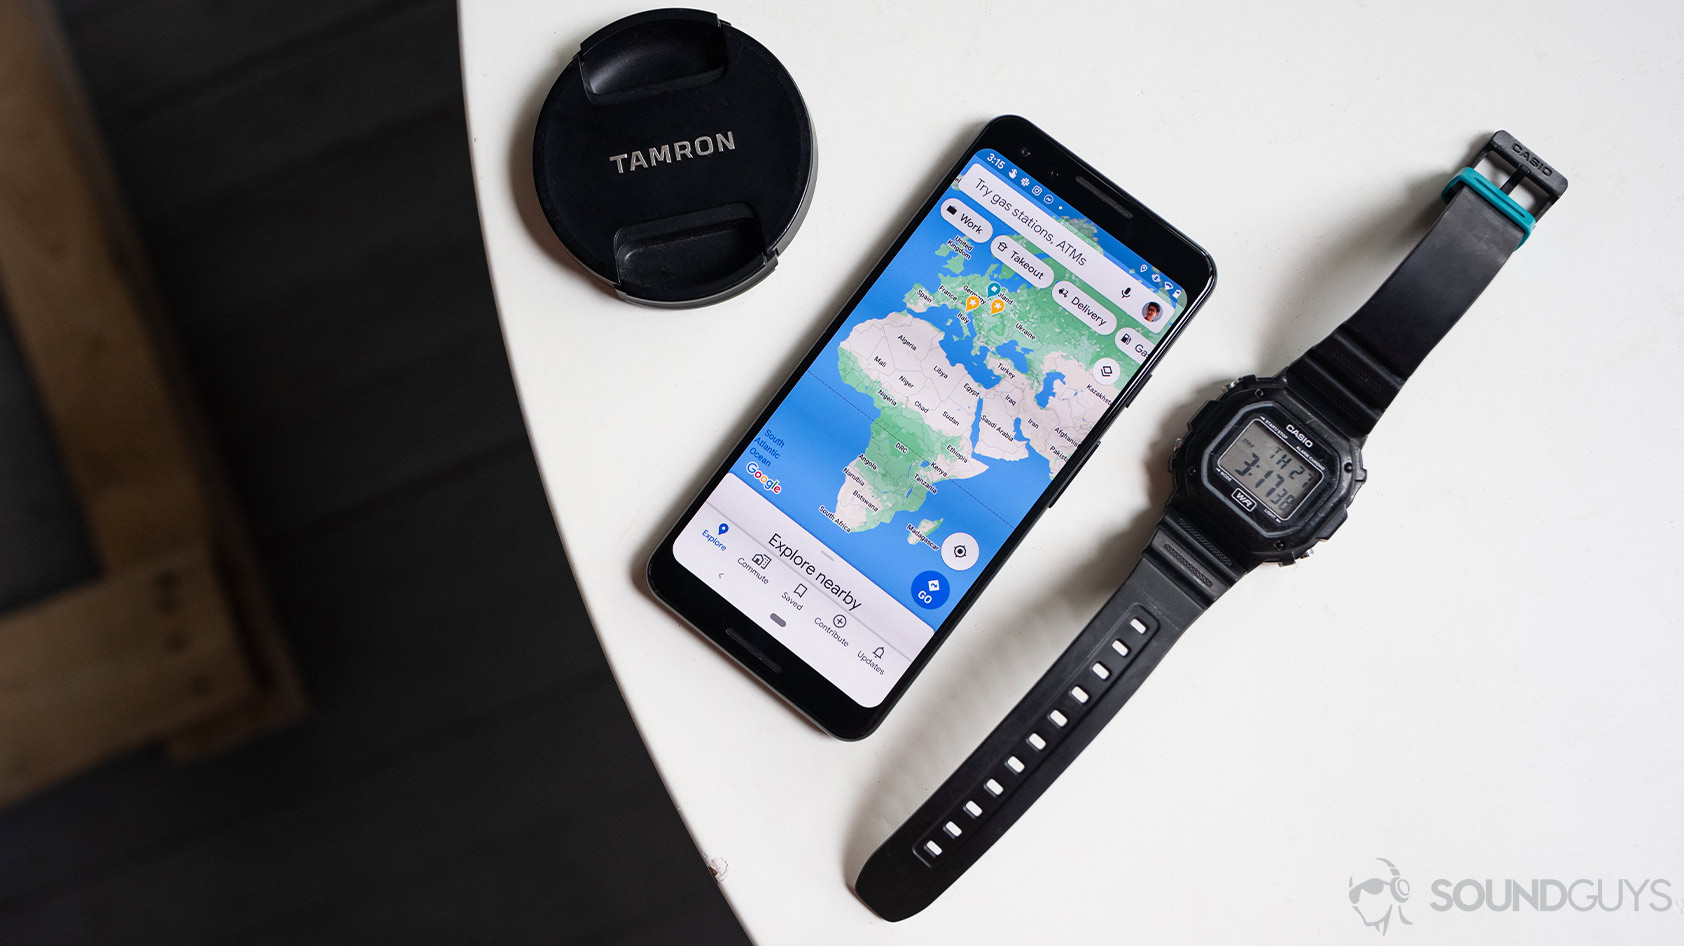 The Google Maps app open on a Google Pixel 3 smartphone, which is flanked by a Tamron lens cap and Casio watch on a white table.